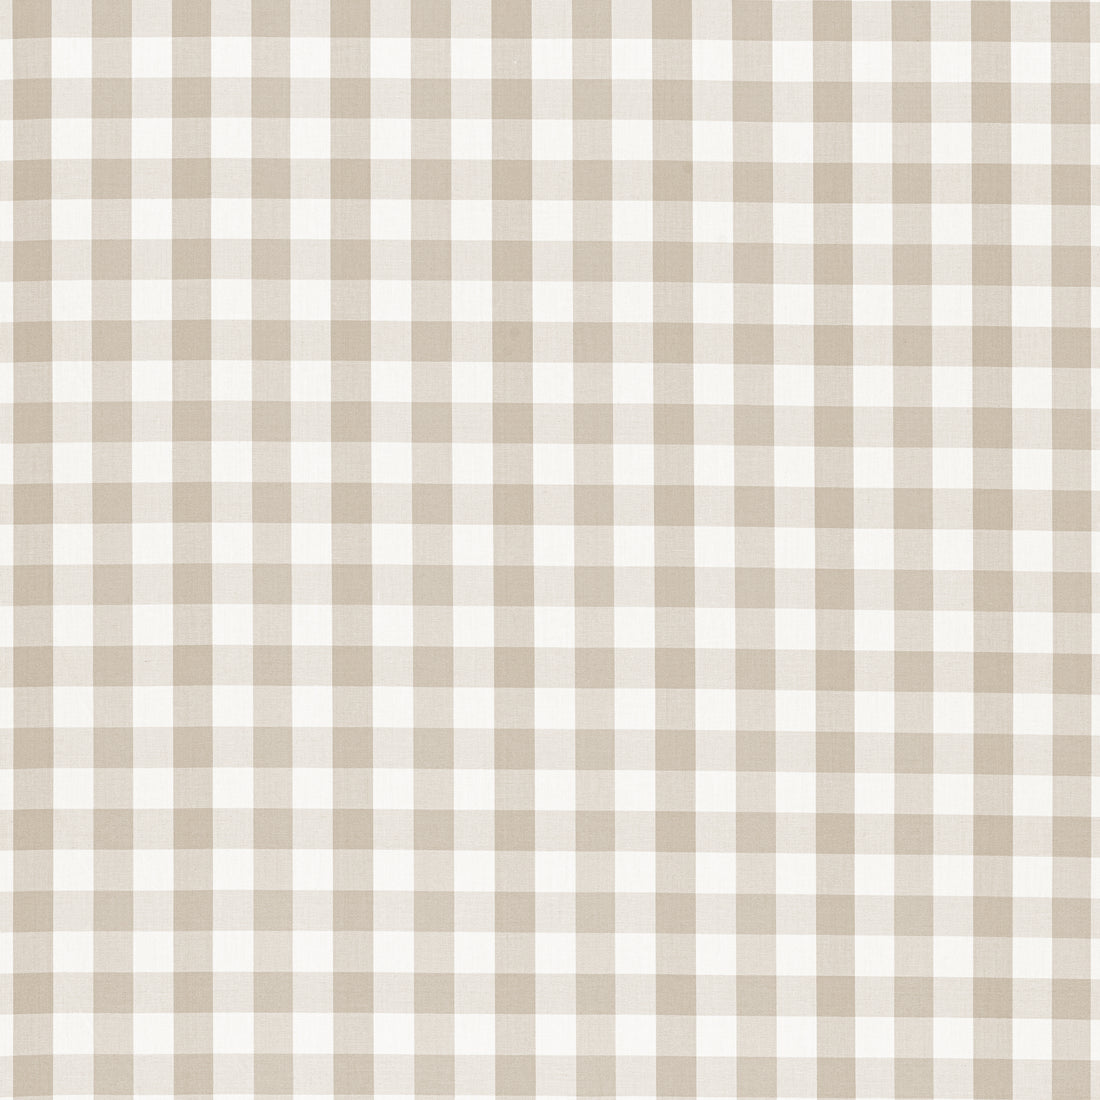 Saybrook Check fabric in beige color - pattern number AW15143 - by Anna French in the Antilles collection